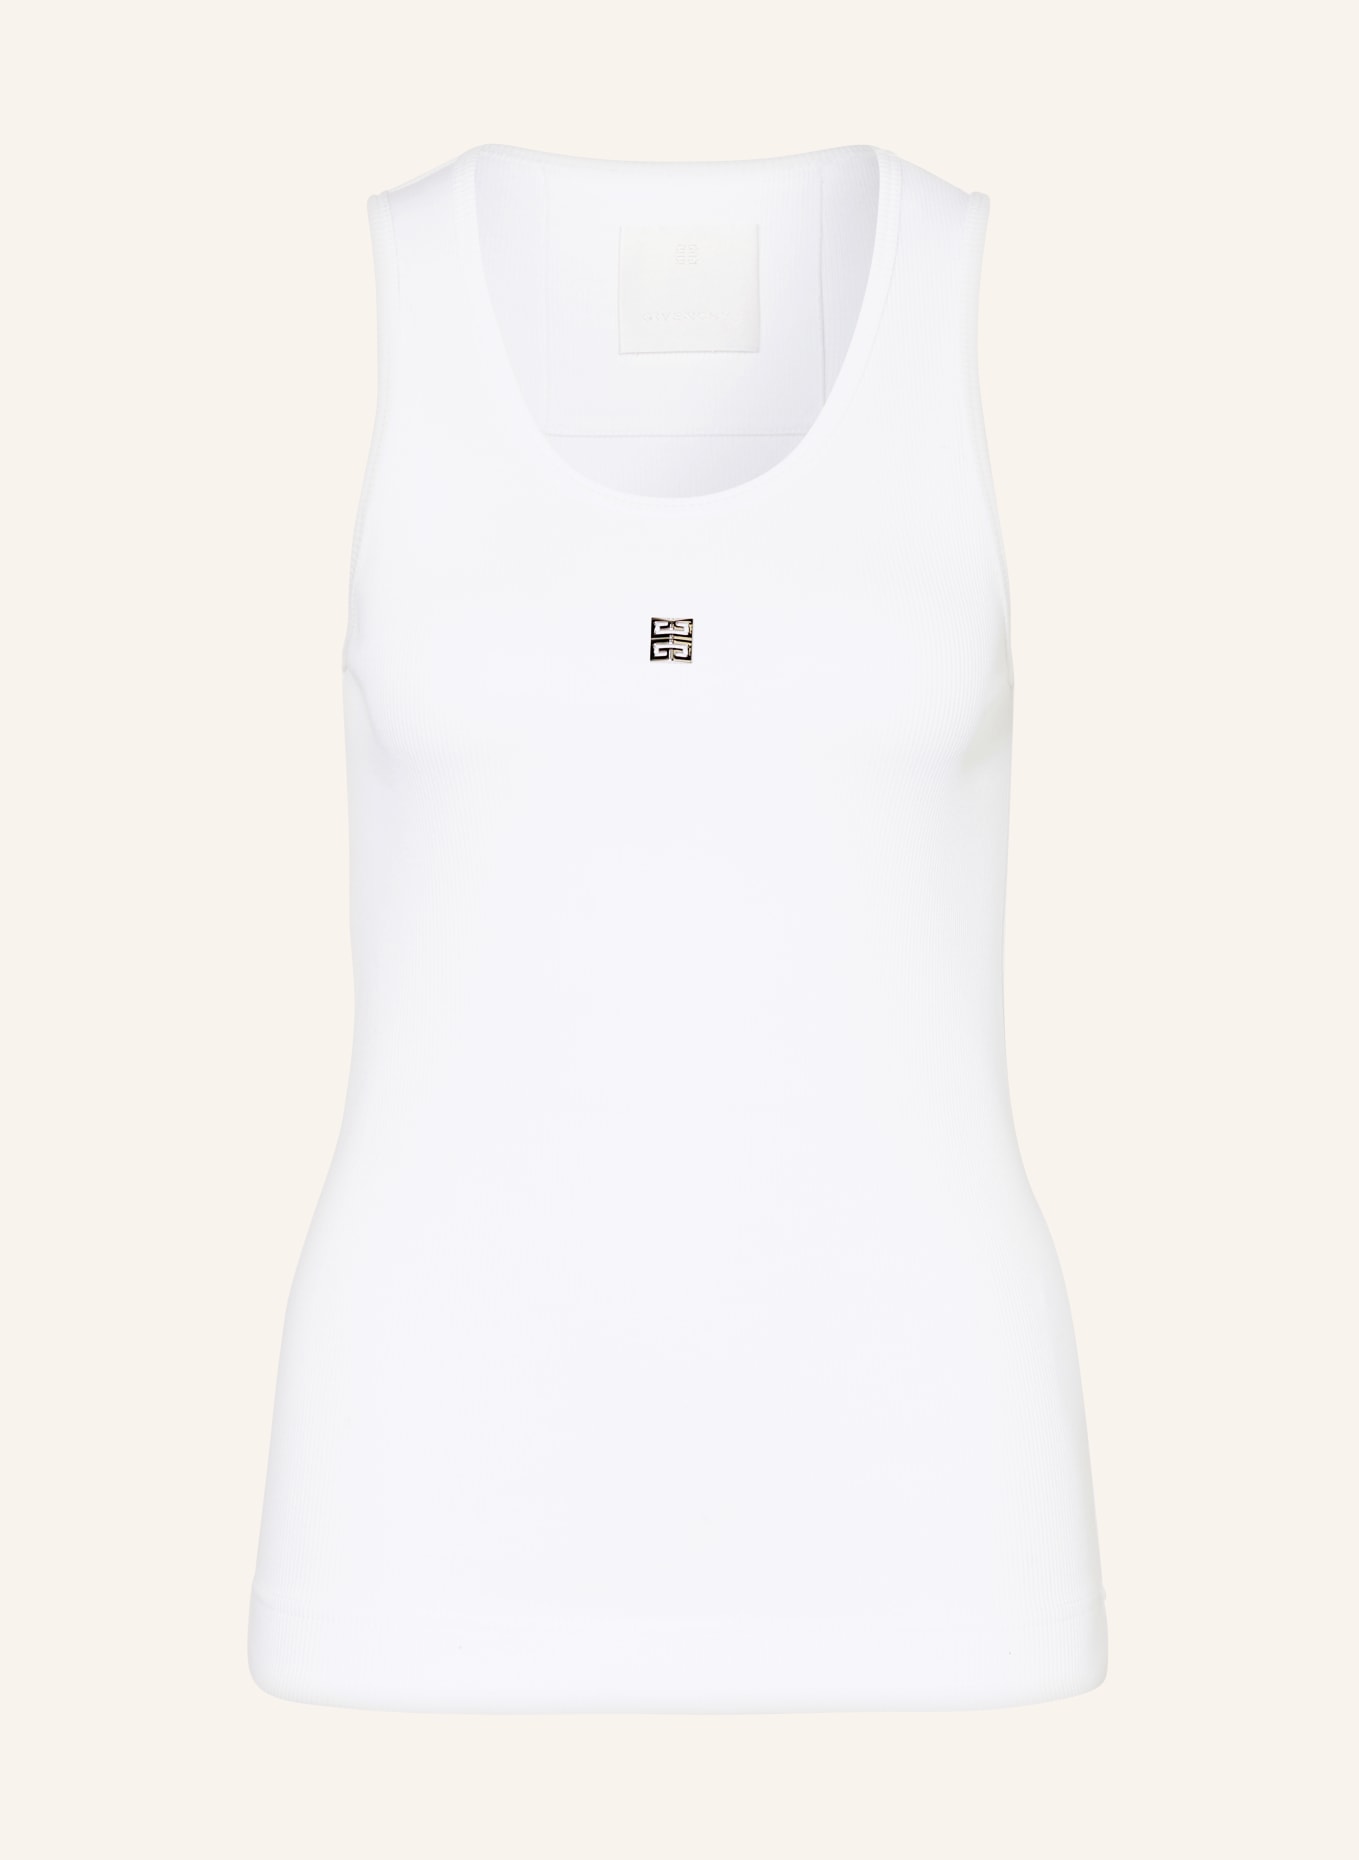 GIVENCHY Top, Farbe: WEISS (Bild 1)